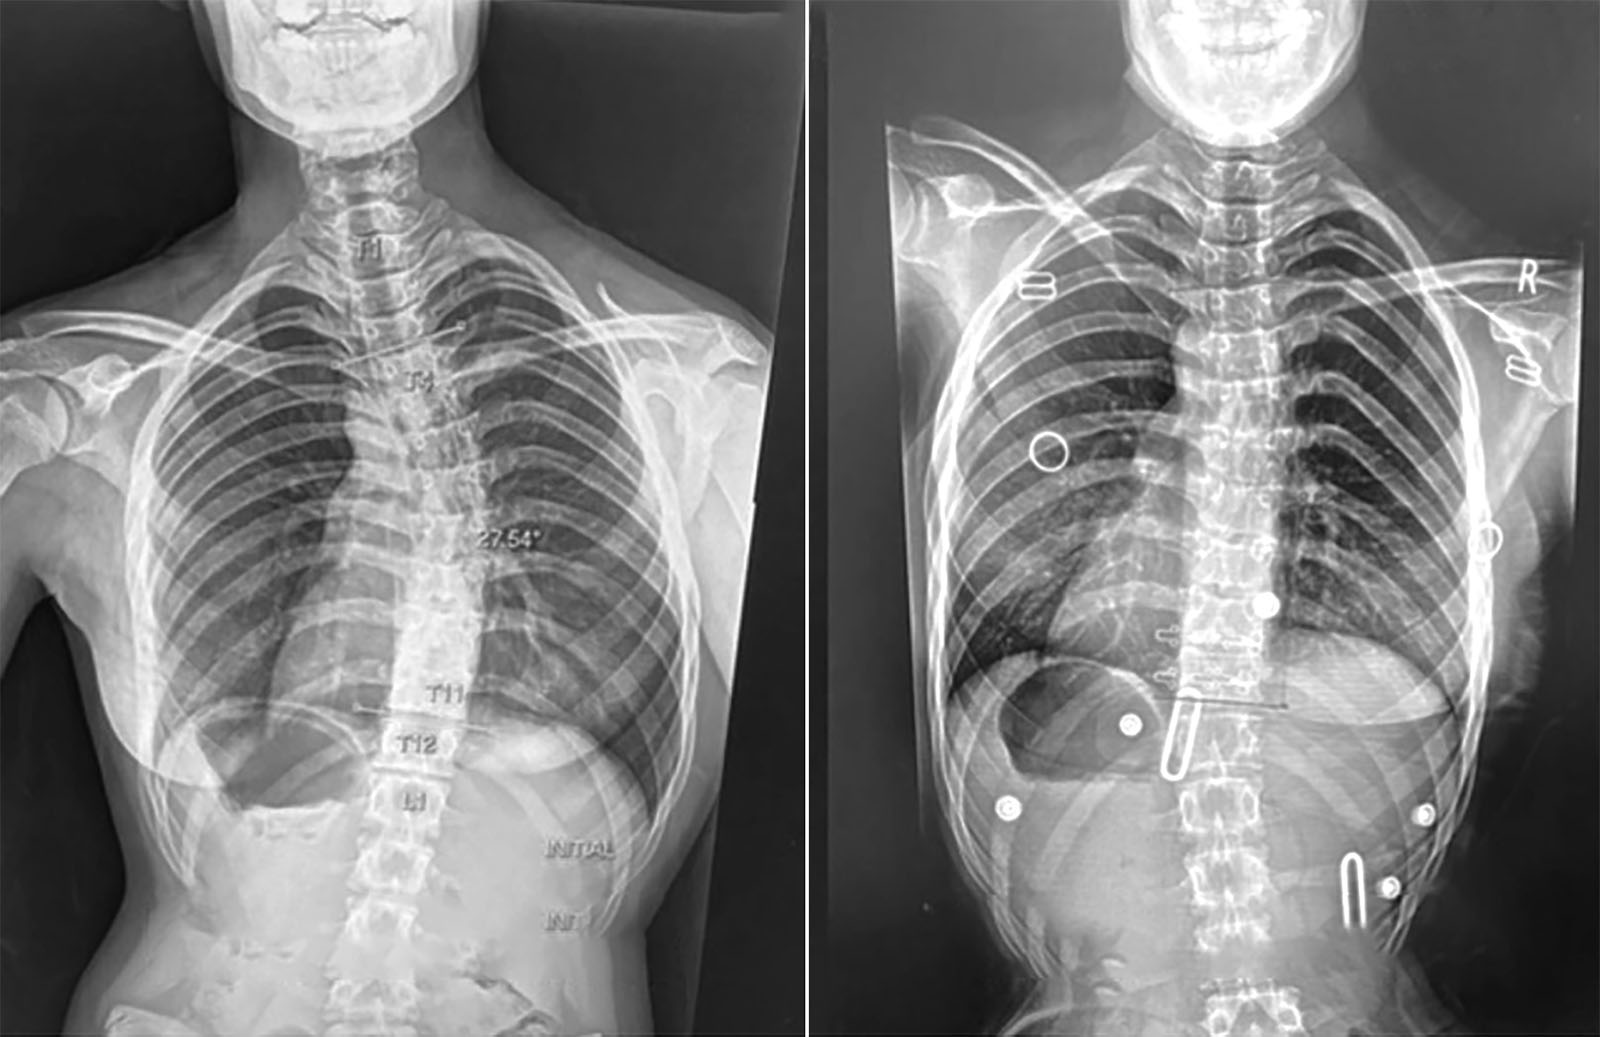 Adolescent Idiopathic Scoliosis patient before after bracing treatment